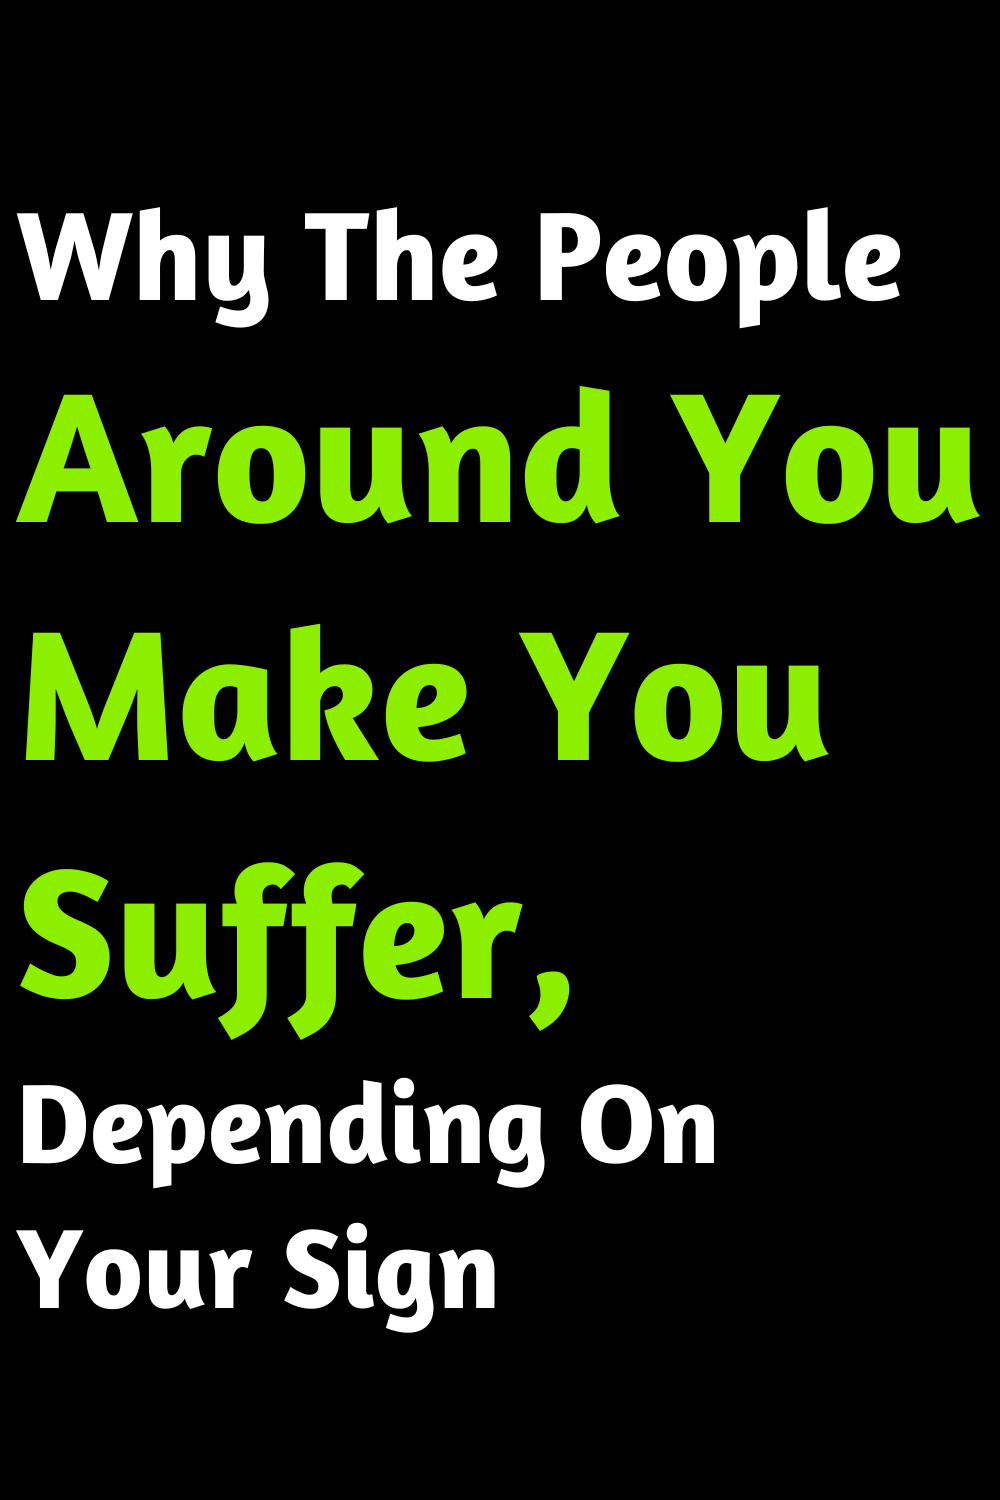 Why The People Around You Make You Suffer, Depending On Your Sign